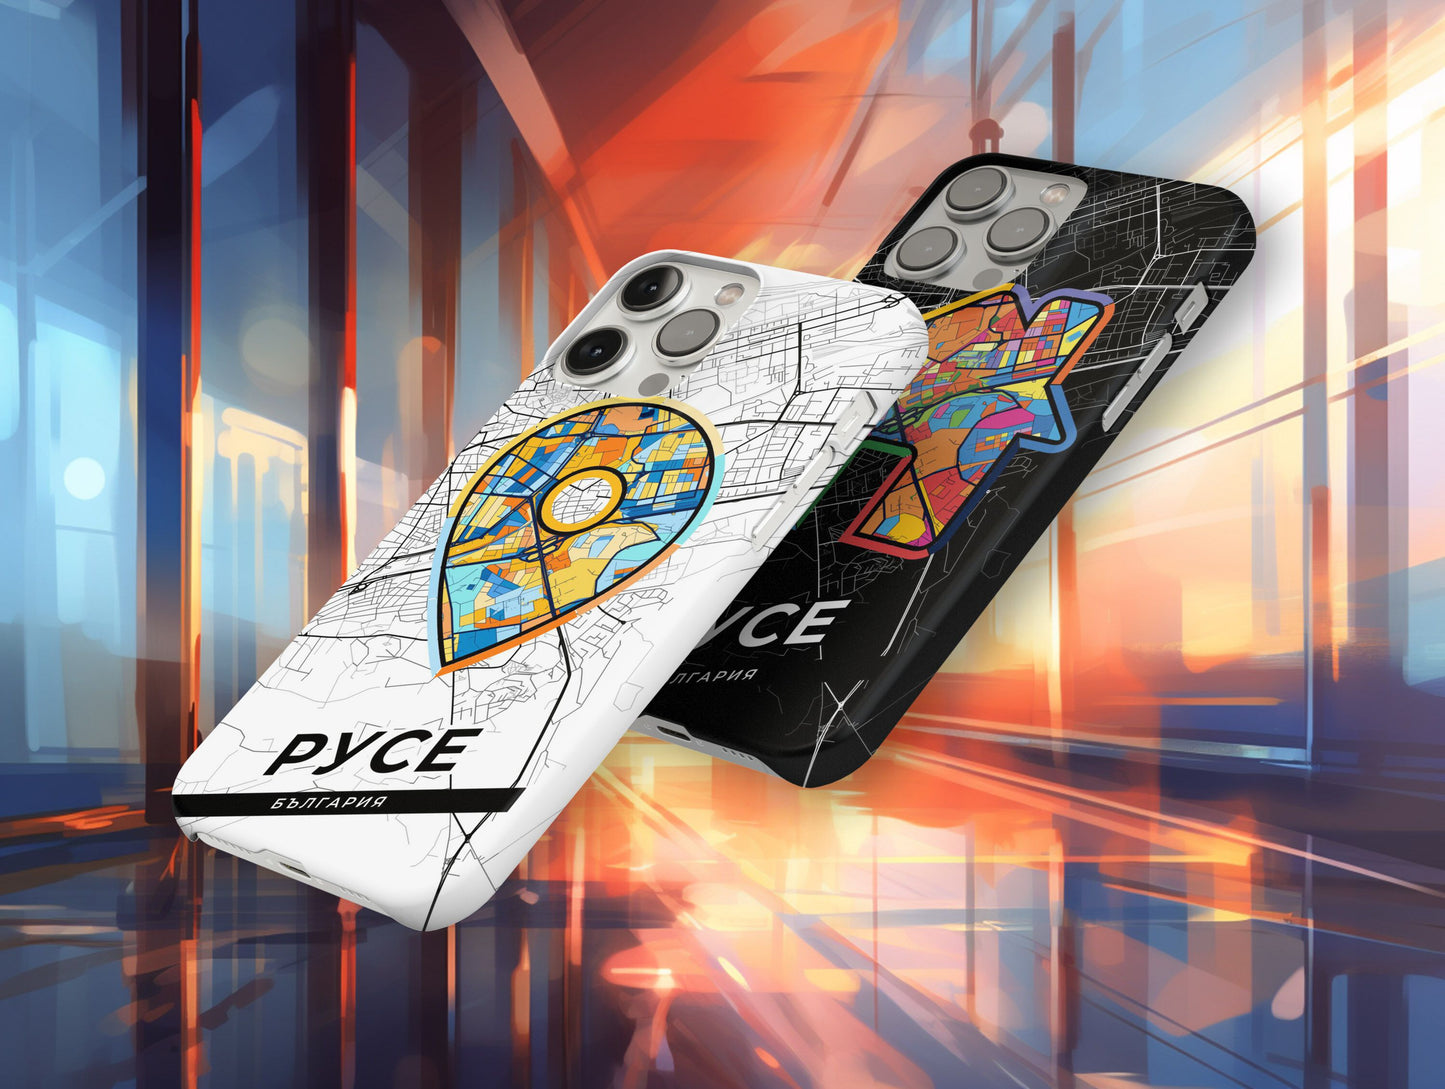 Русе България slim phone case with colorful icon. Birthday, wedding or housewarming gift. Couple match cases.